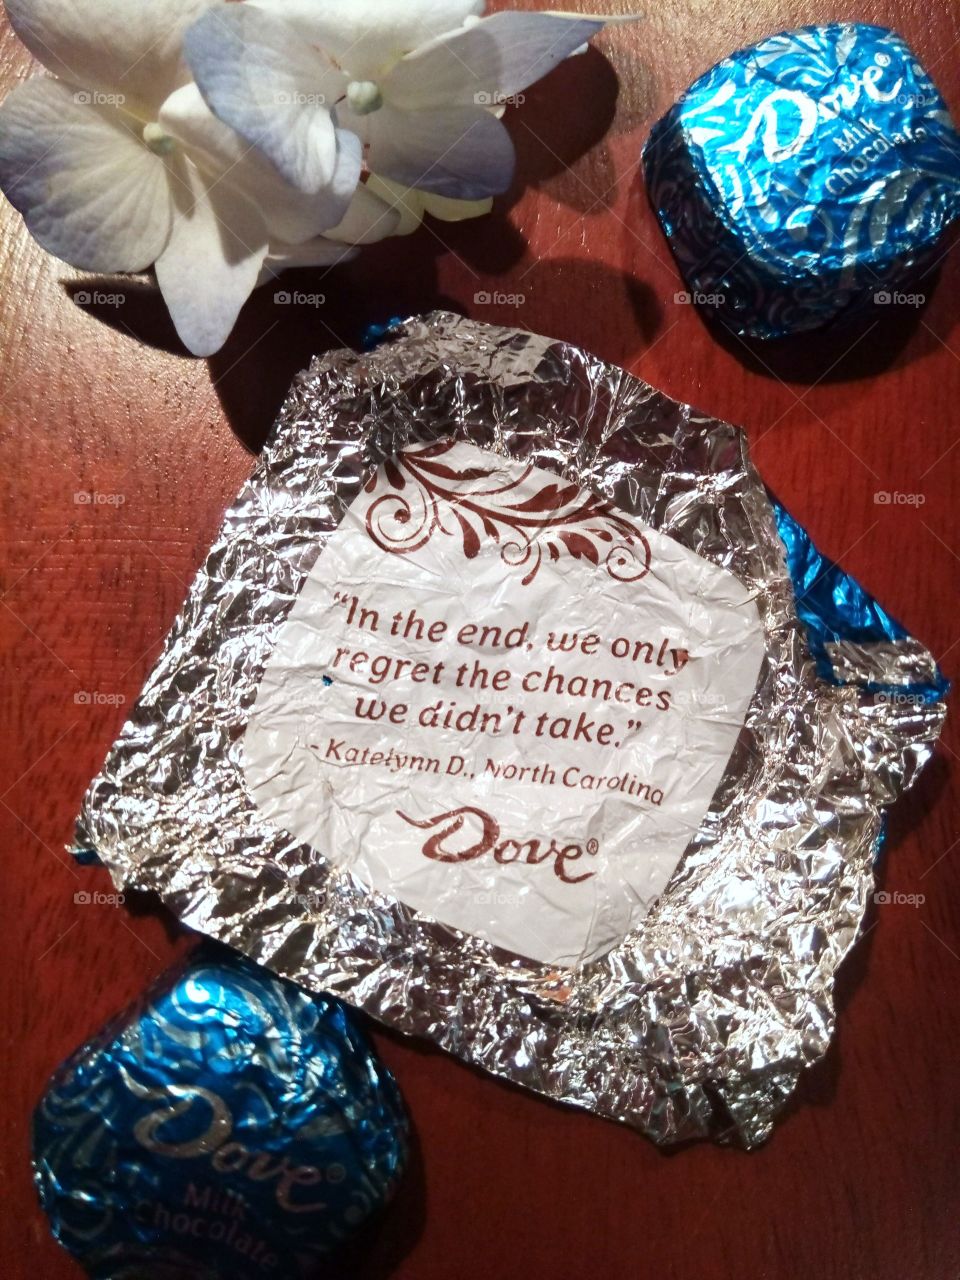 Dove™ Candy Foil Wrapper with Life Quote